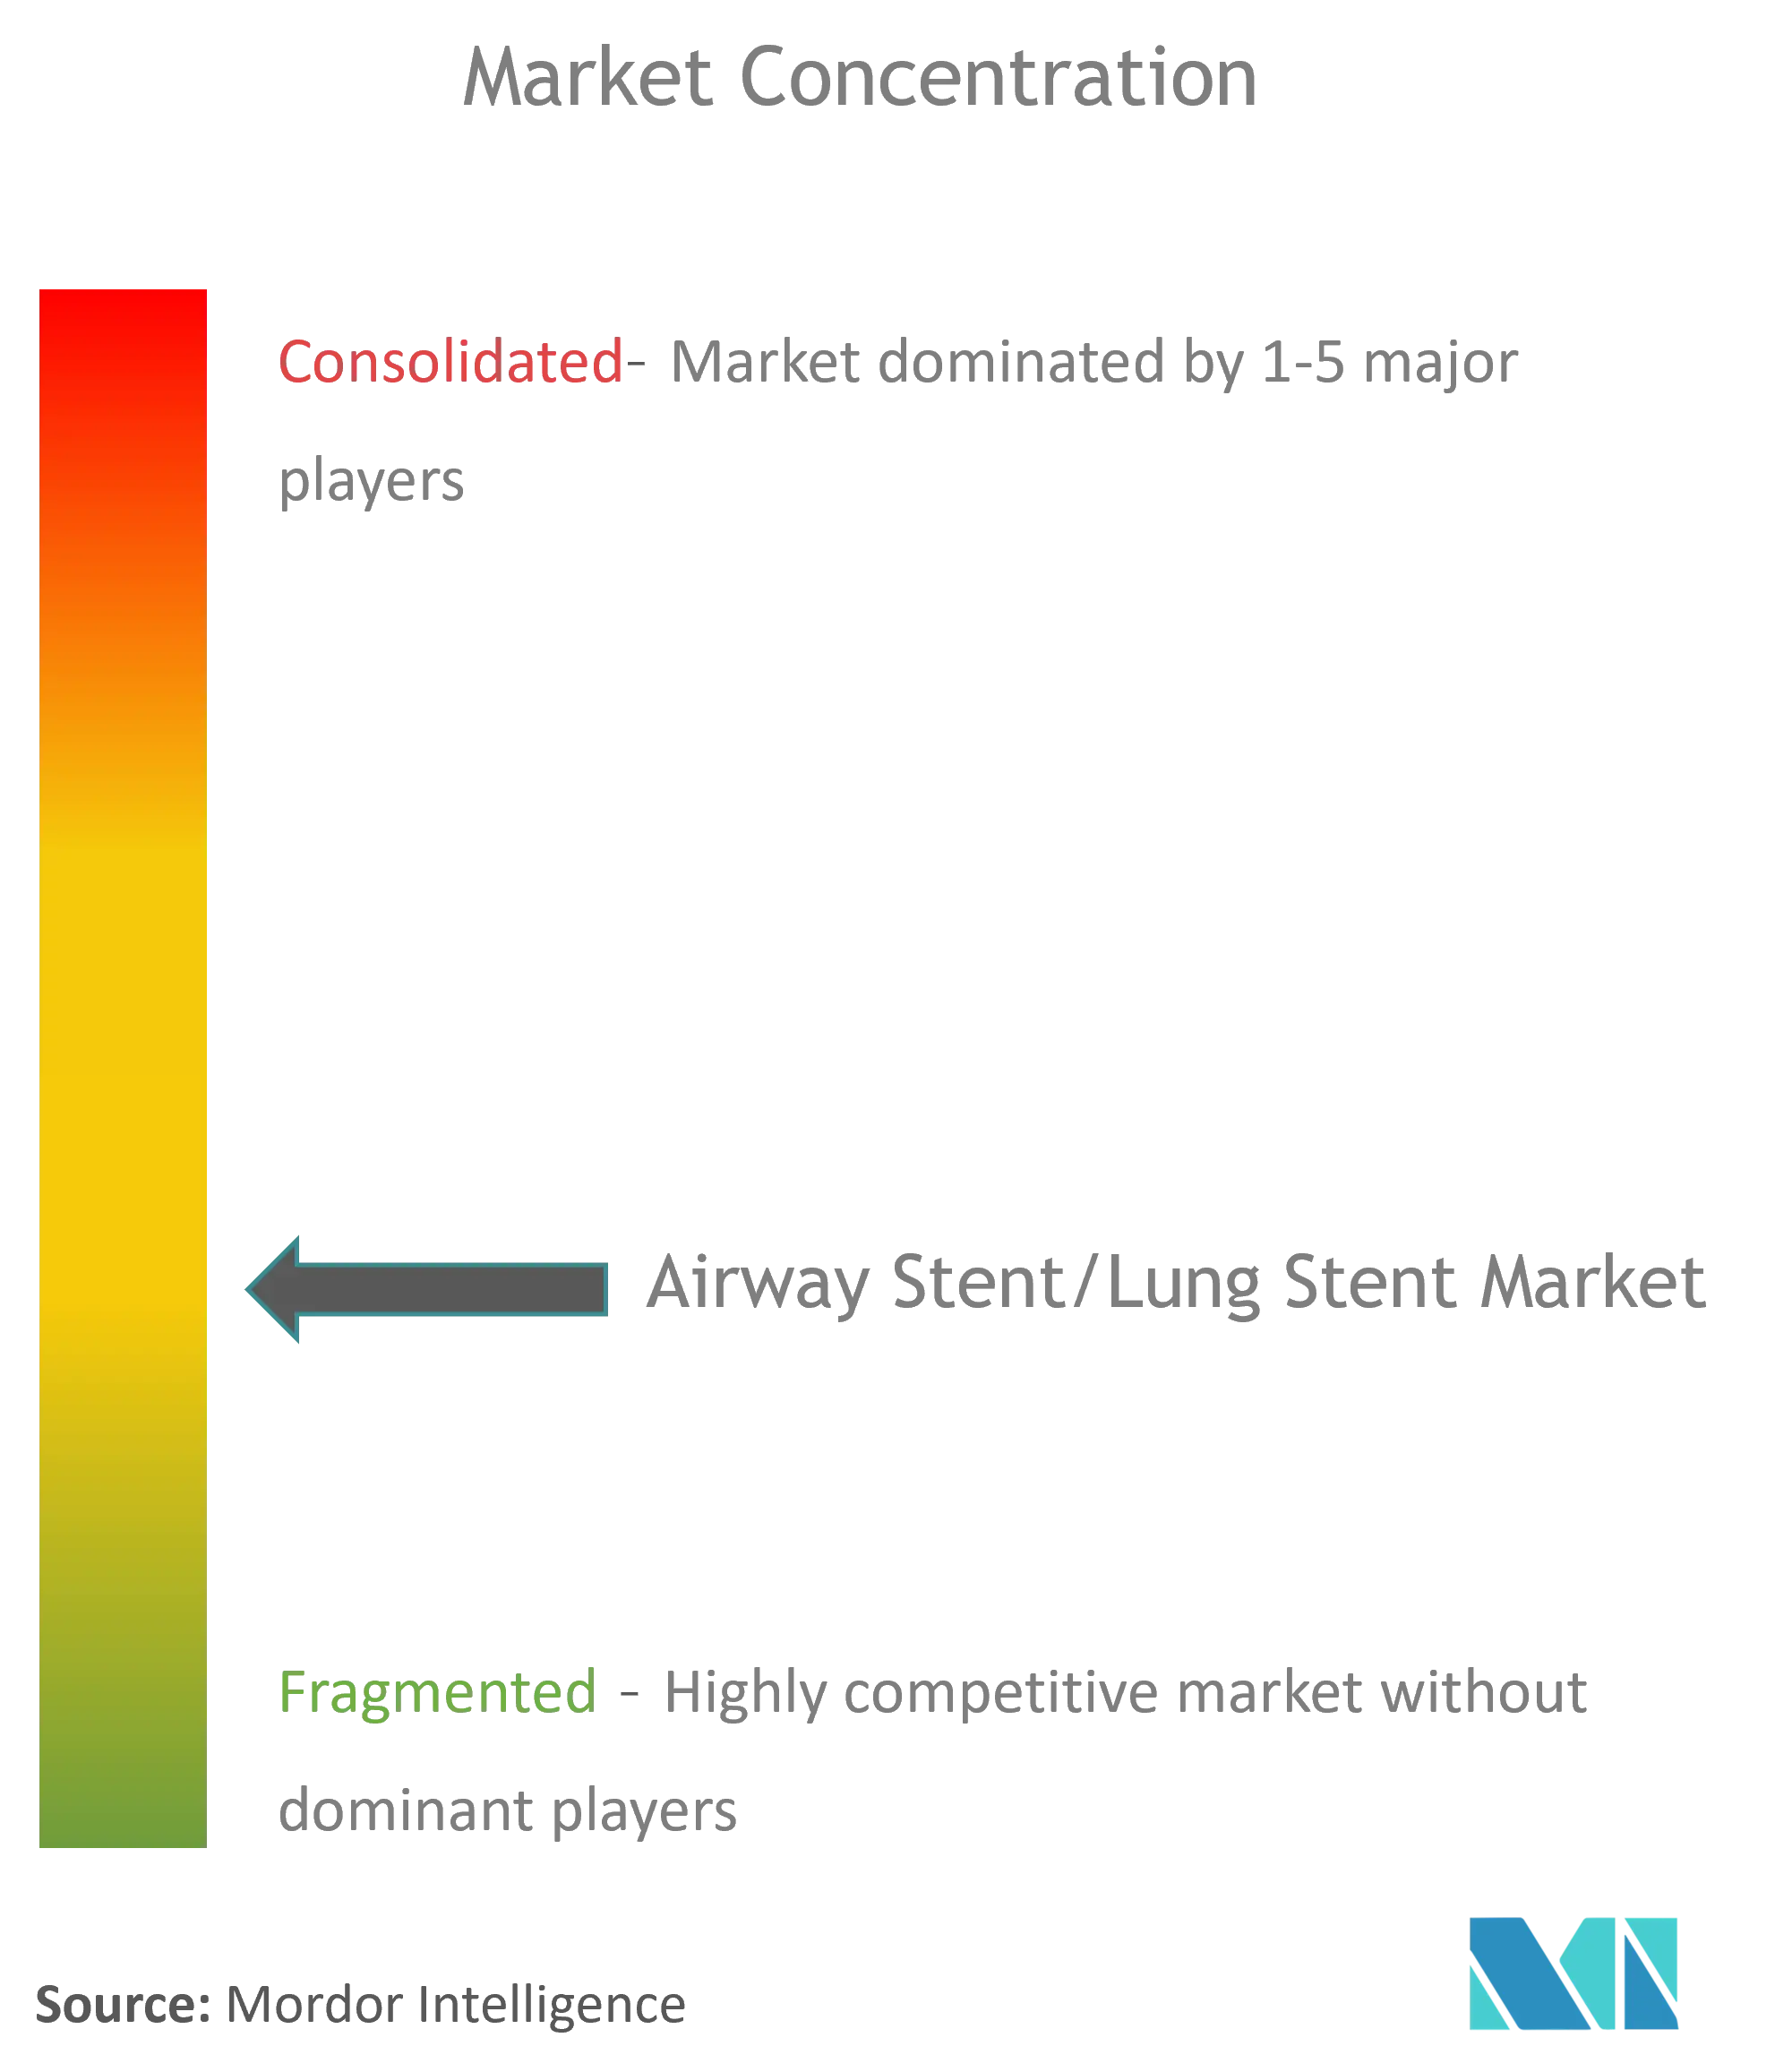 Airway Stent/Lung Stent Market Concentration